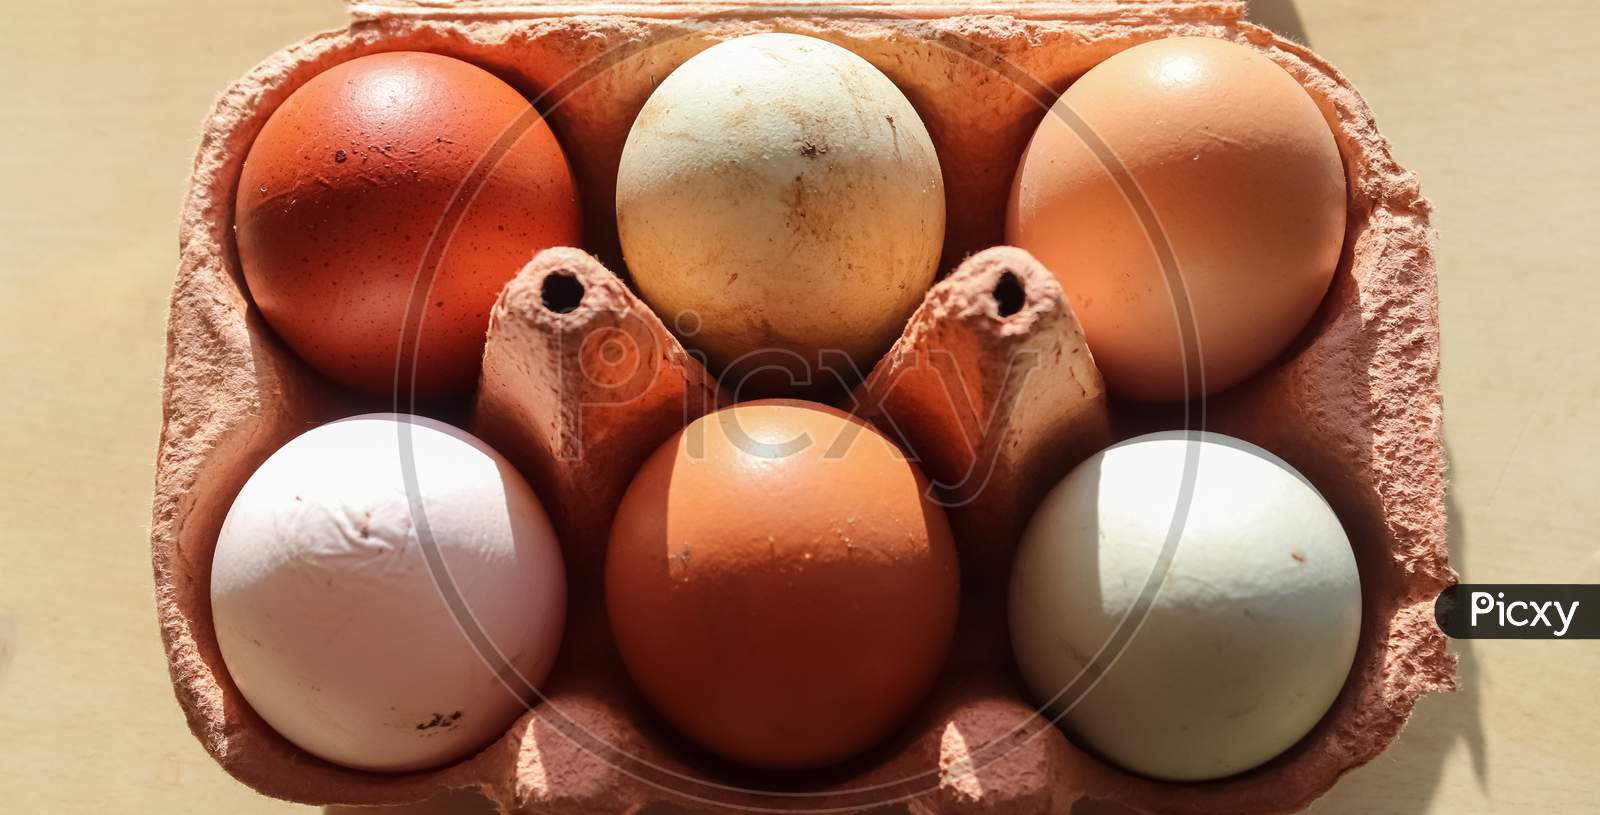 Selective Focus View At A Box With Eggs In Different Colors